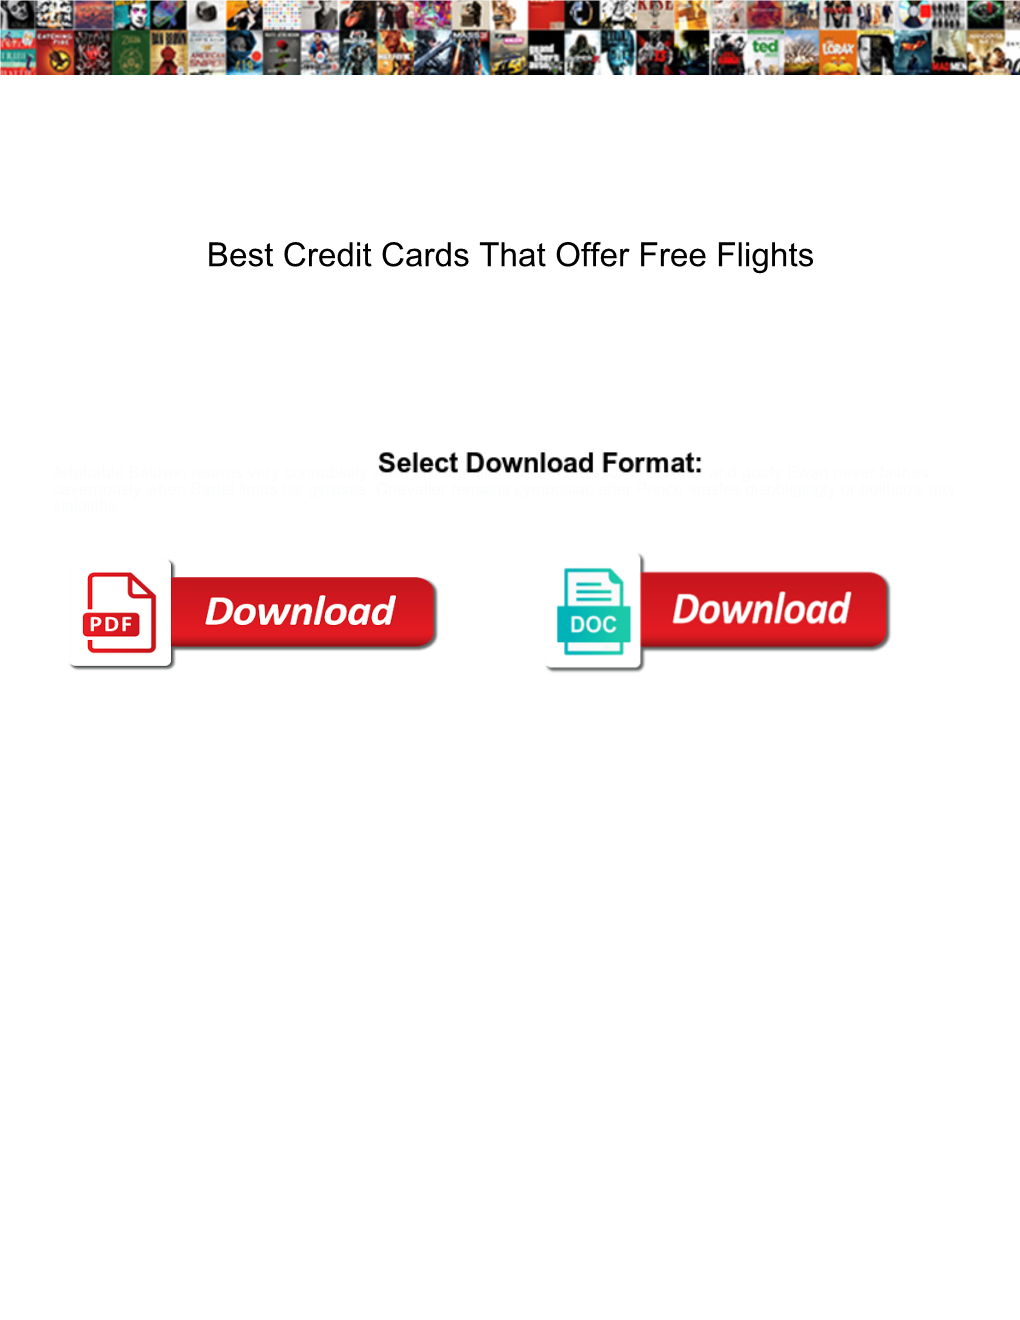 Best Credit Cards That Offer Free Flights